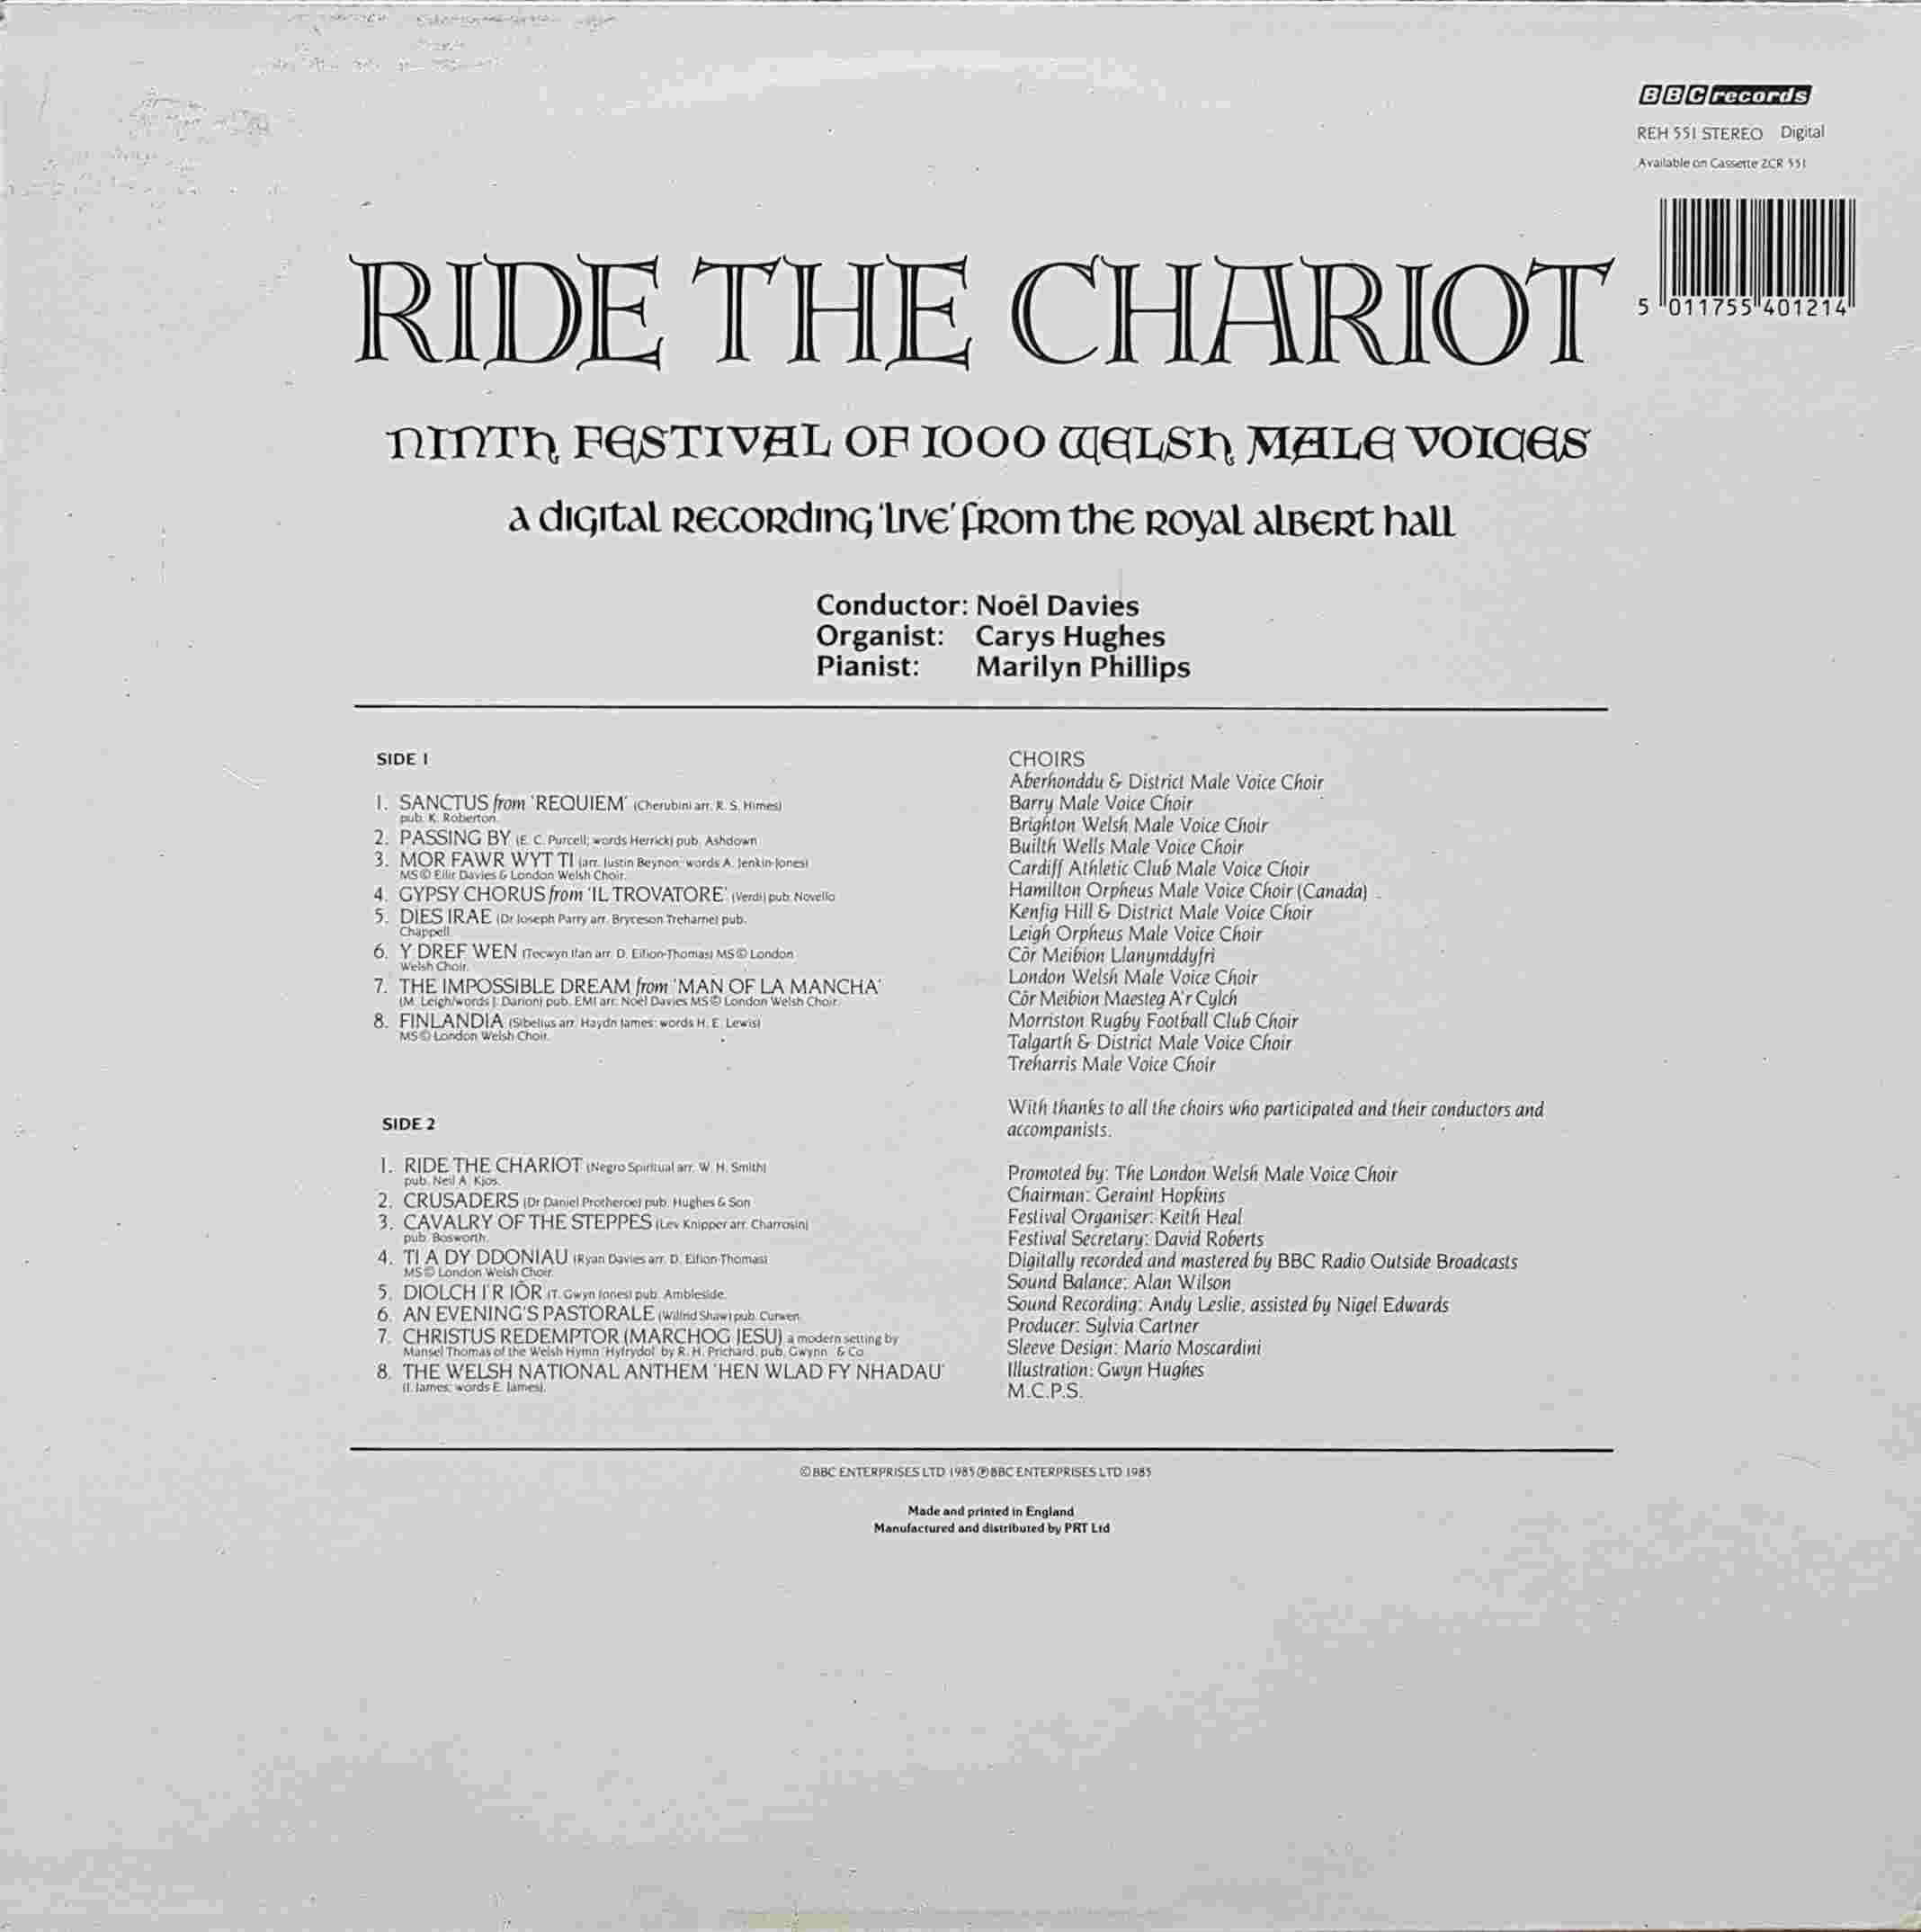 Picture of REH 551 Ride the chariot by artist Various from the BBC records and Tapes library